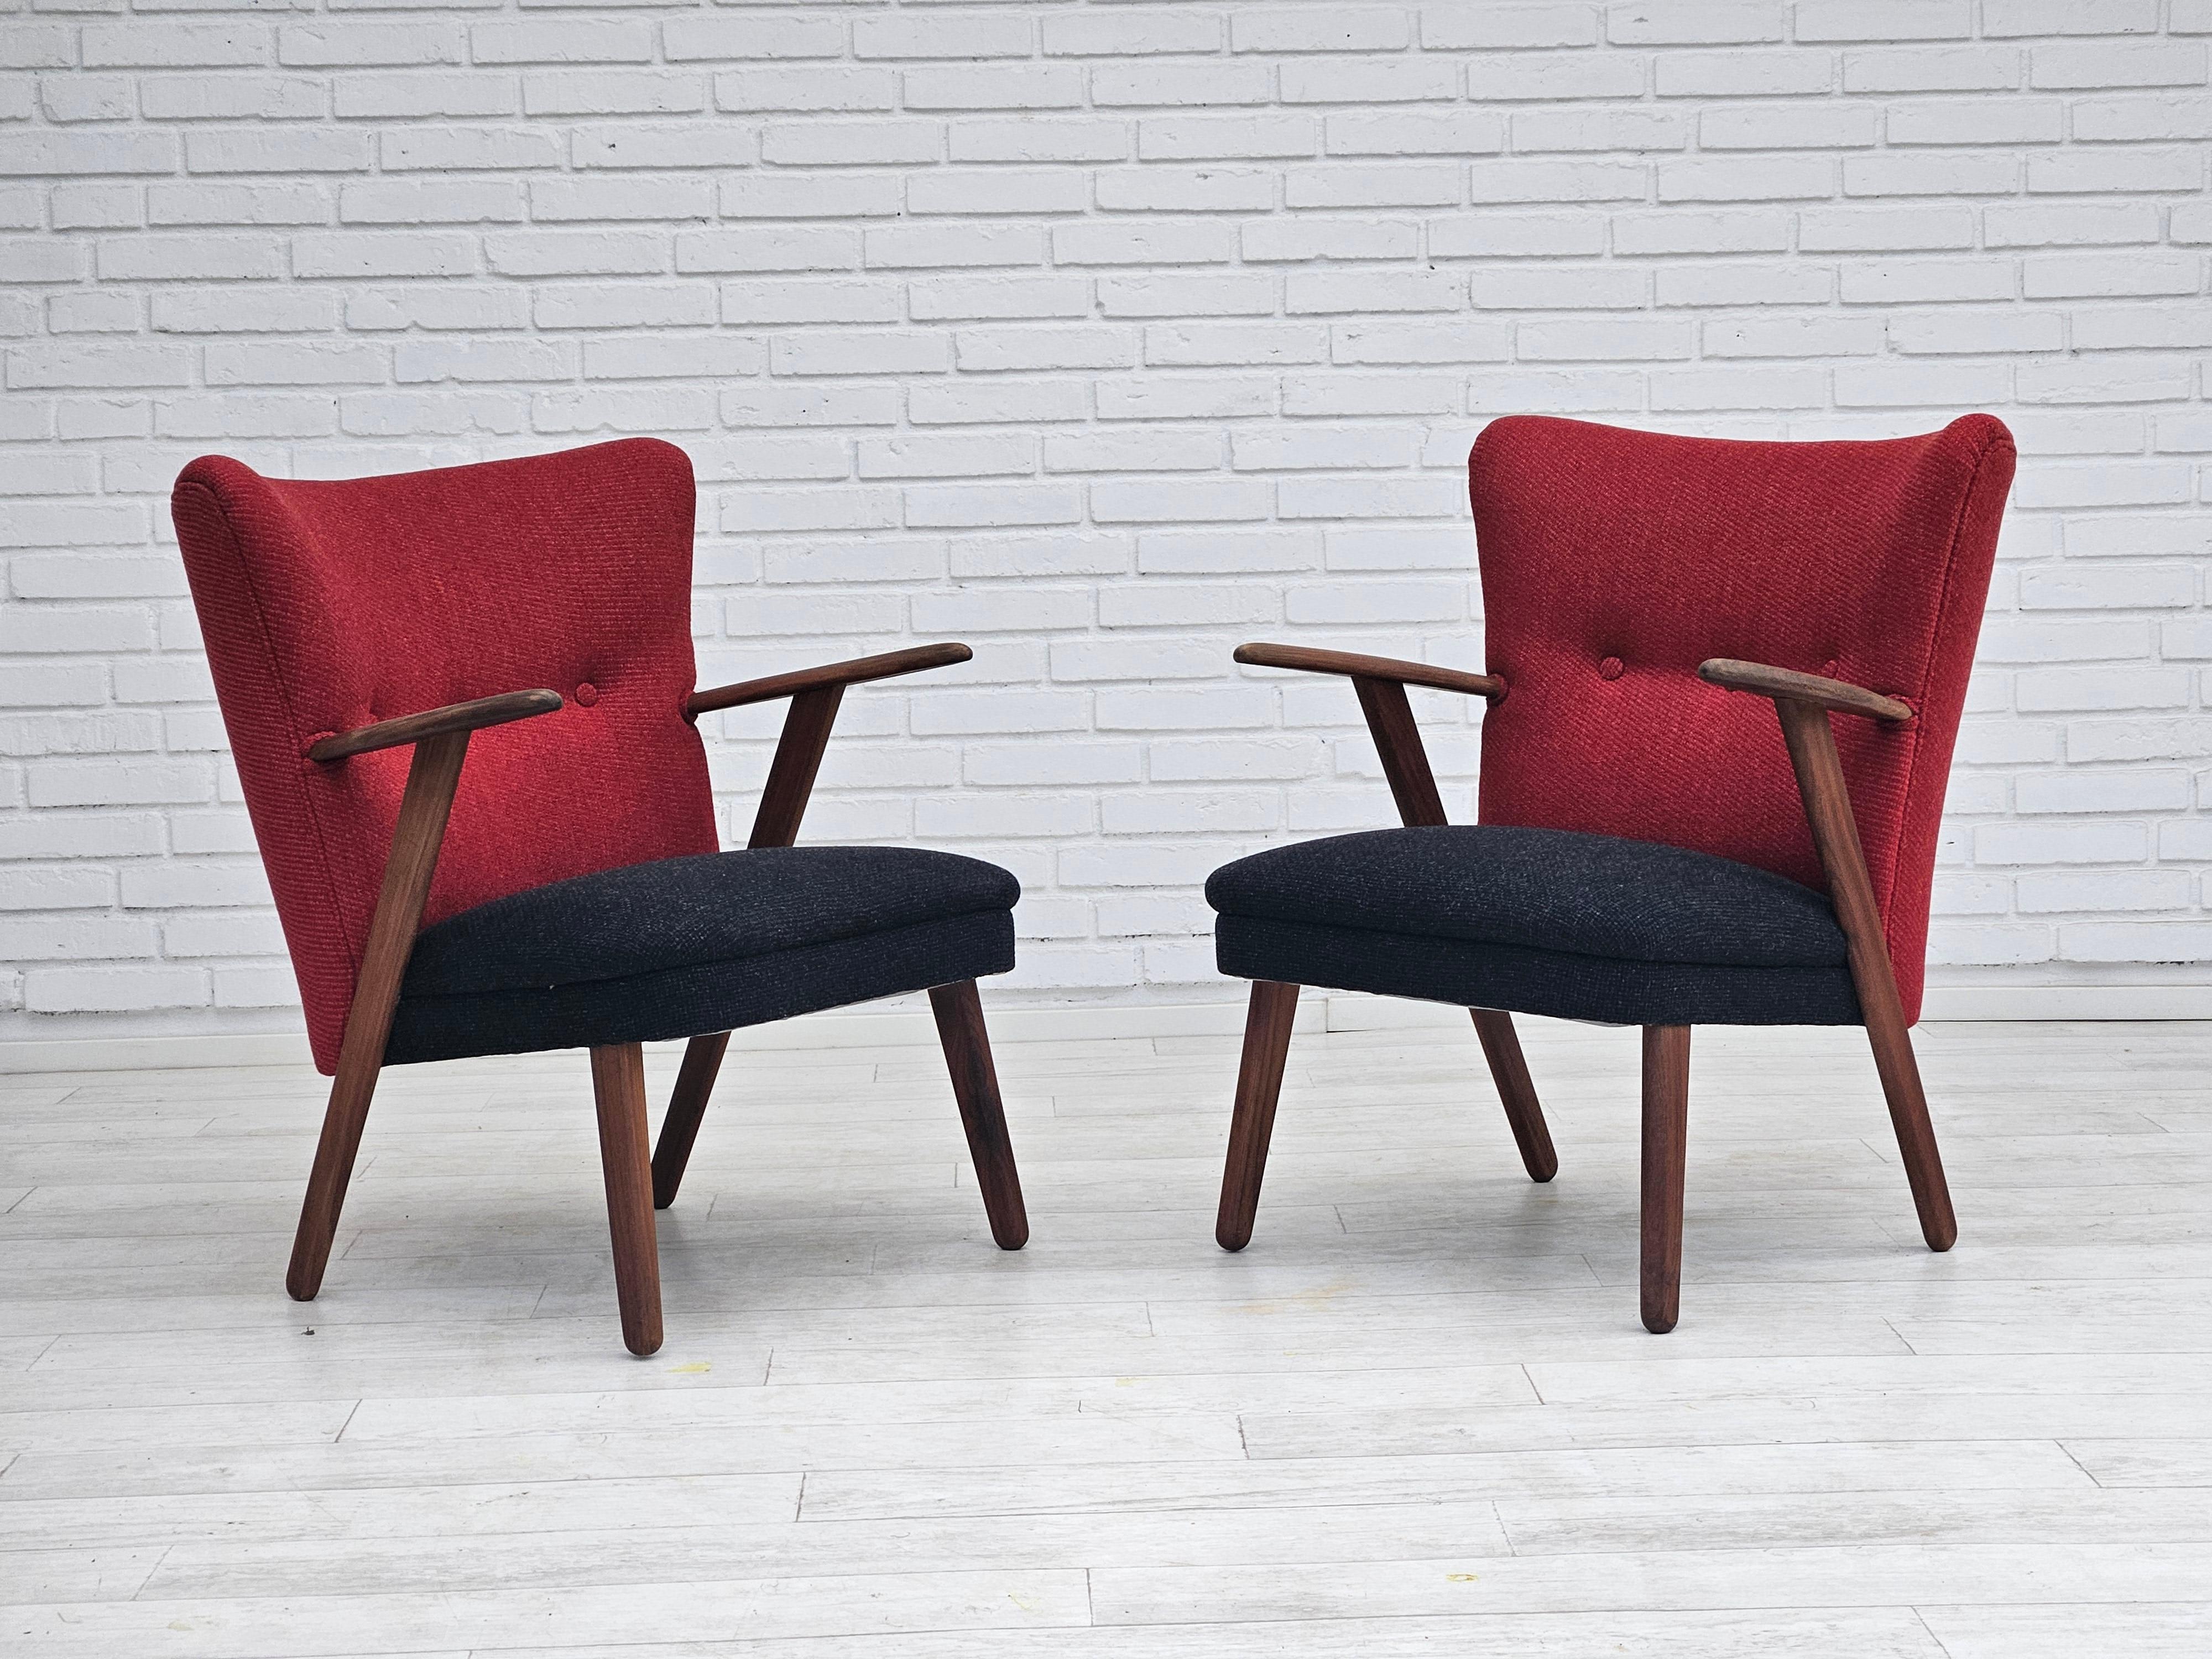 1960s, Danish design by Erhardsen & Andersen. Completely refurbished-reupholstered armchair. Furniture wool fabric in charcoal gray and red. Renewed teak wood. Brand new upholstery. Manufactured by Danish furniture manufacturer Eran Møbler, Nykøbing